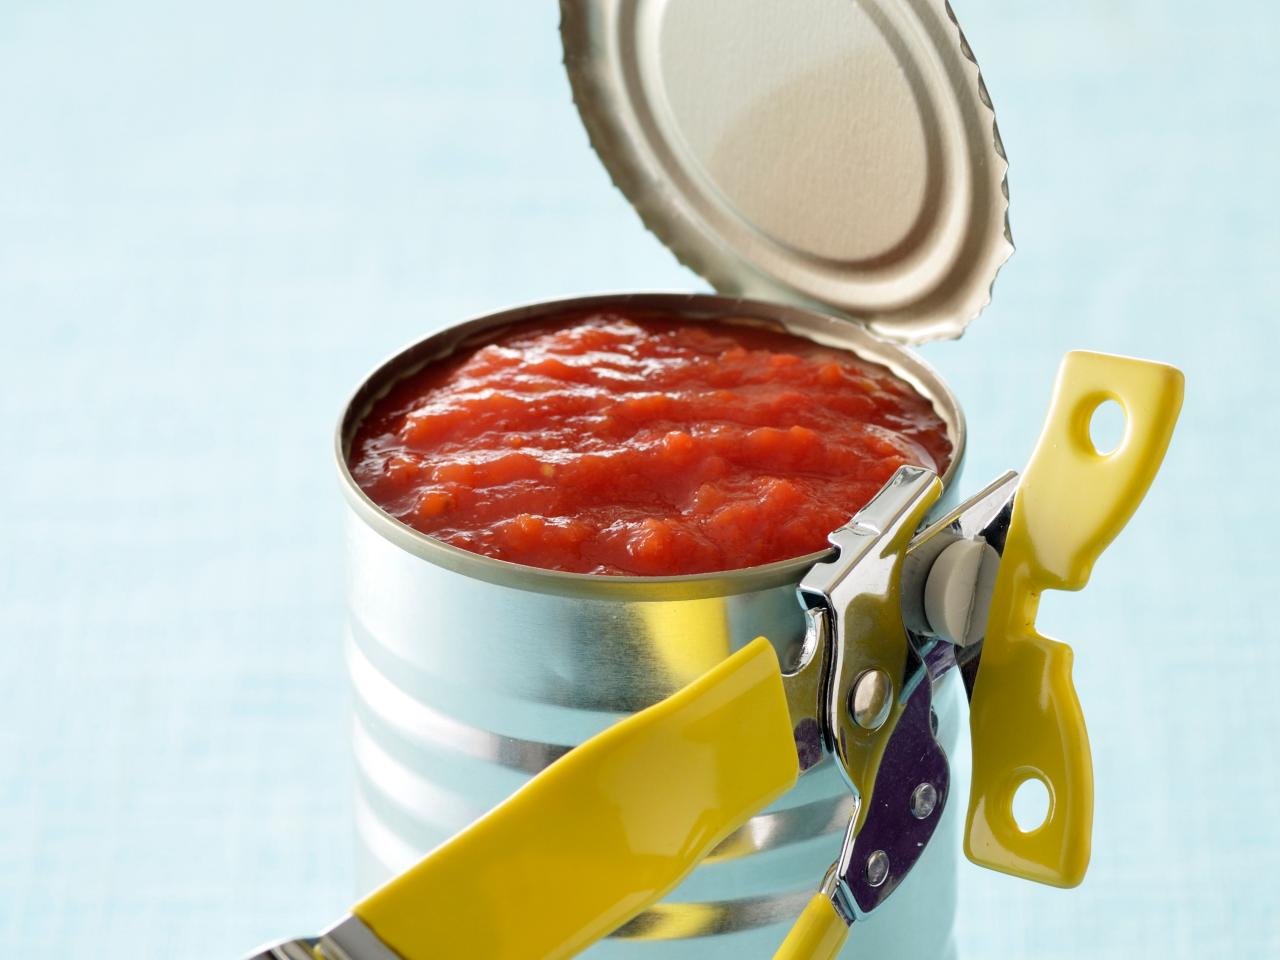 Safe Can Opener with No Sharp Edges, for Household, Kitchen & Bar